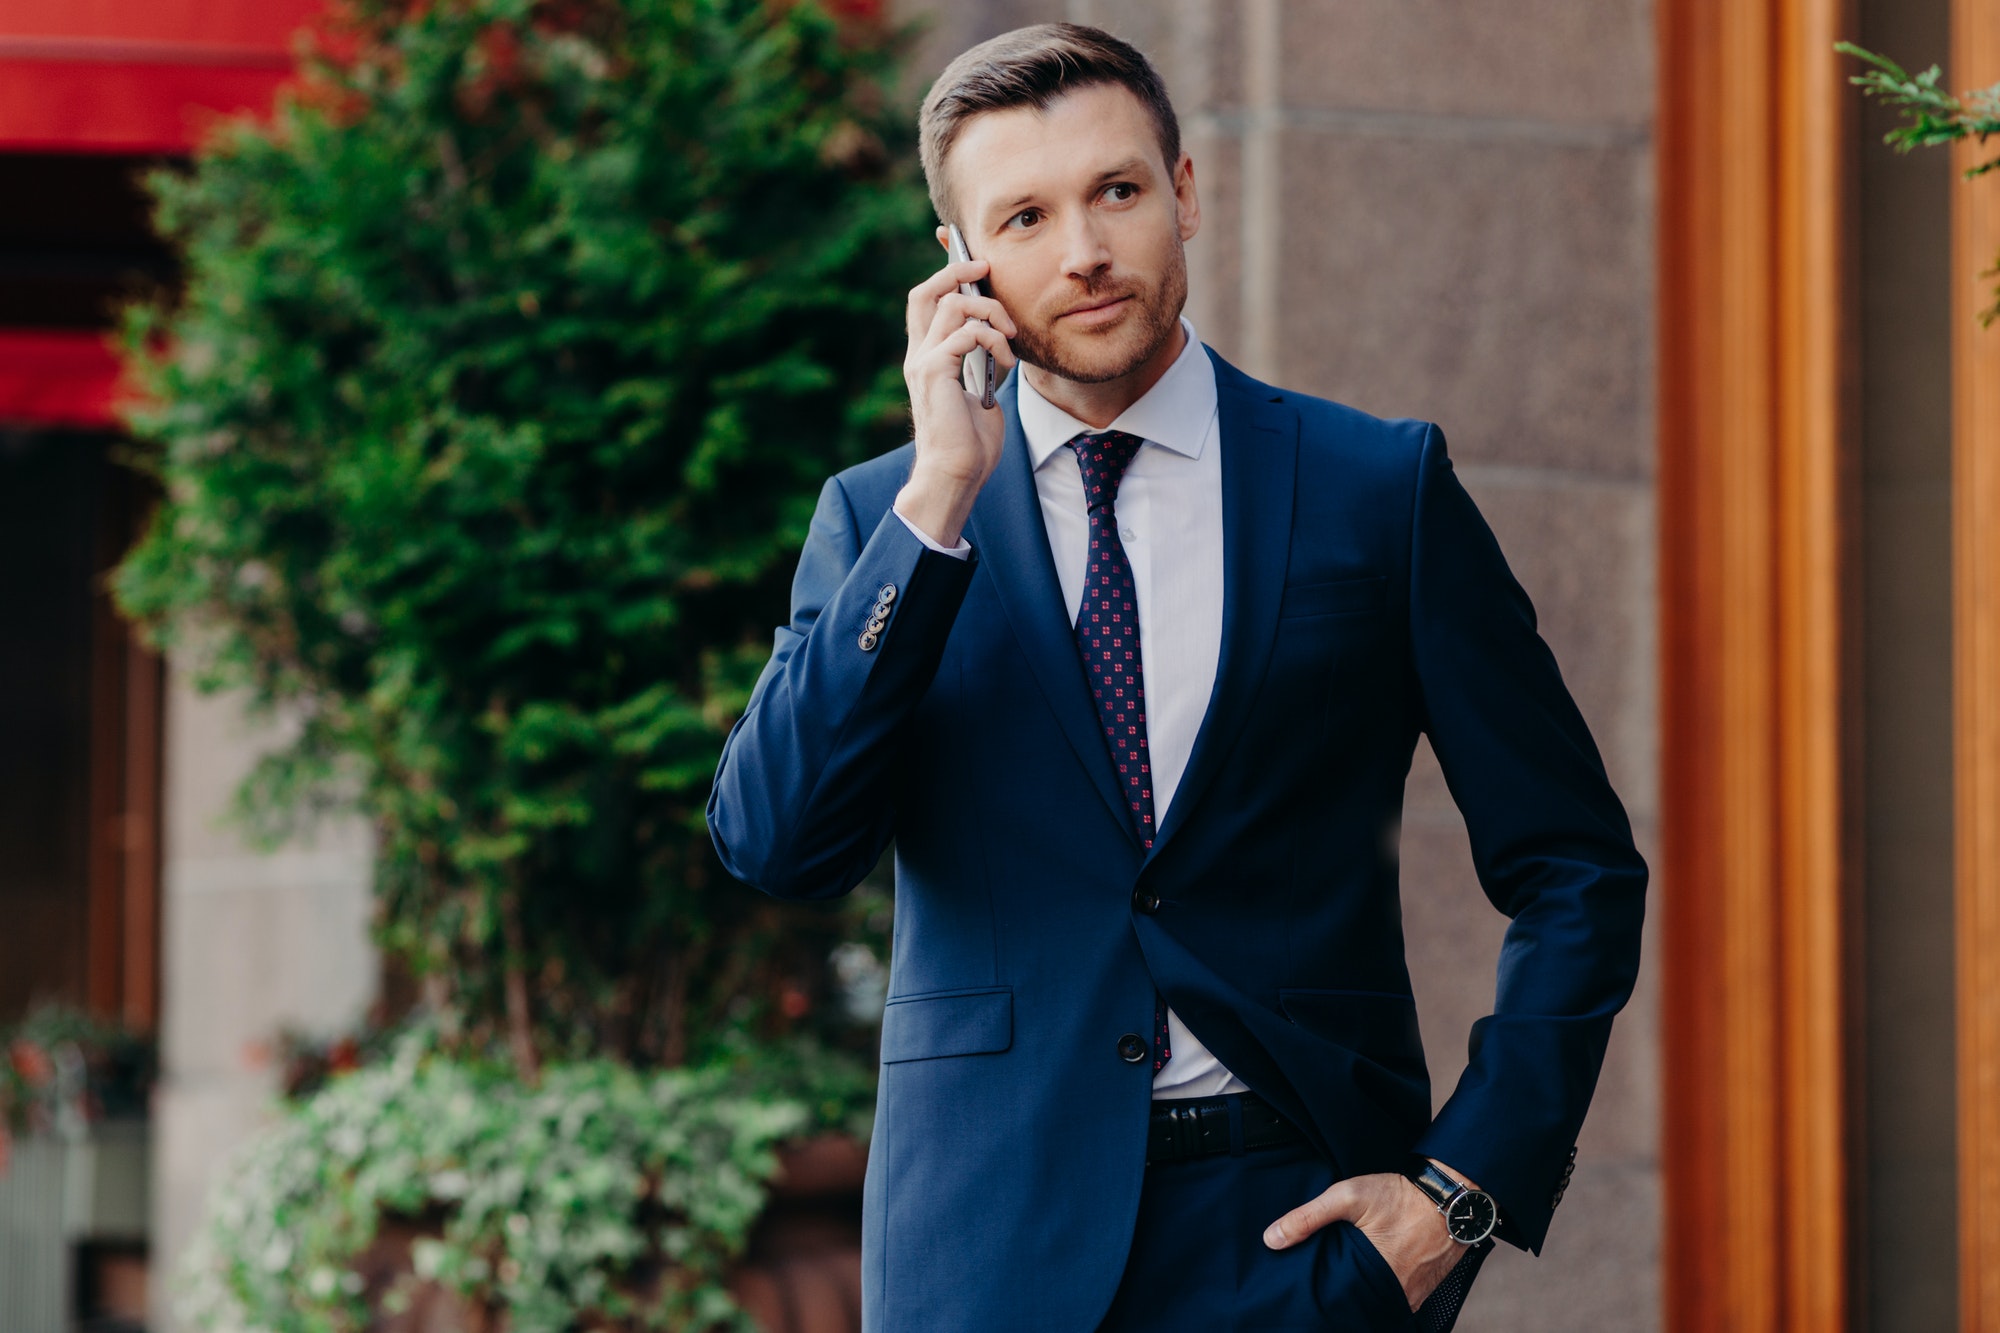 Young male CEO has telephone conversation, looks confidently into distance